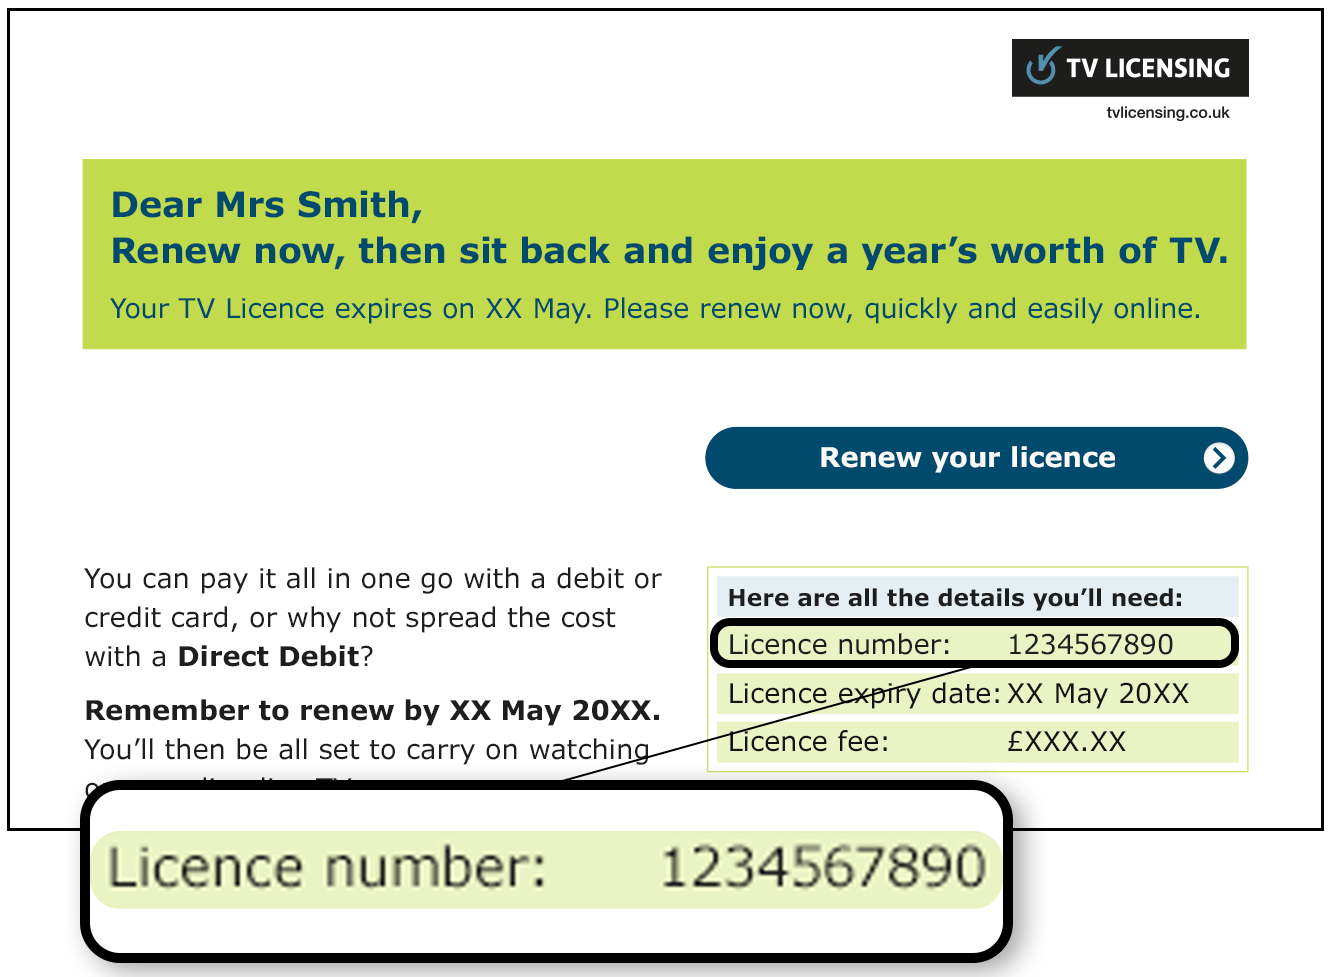 Where to find your licence number